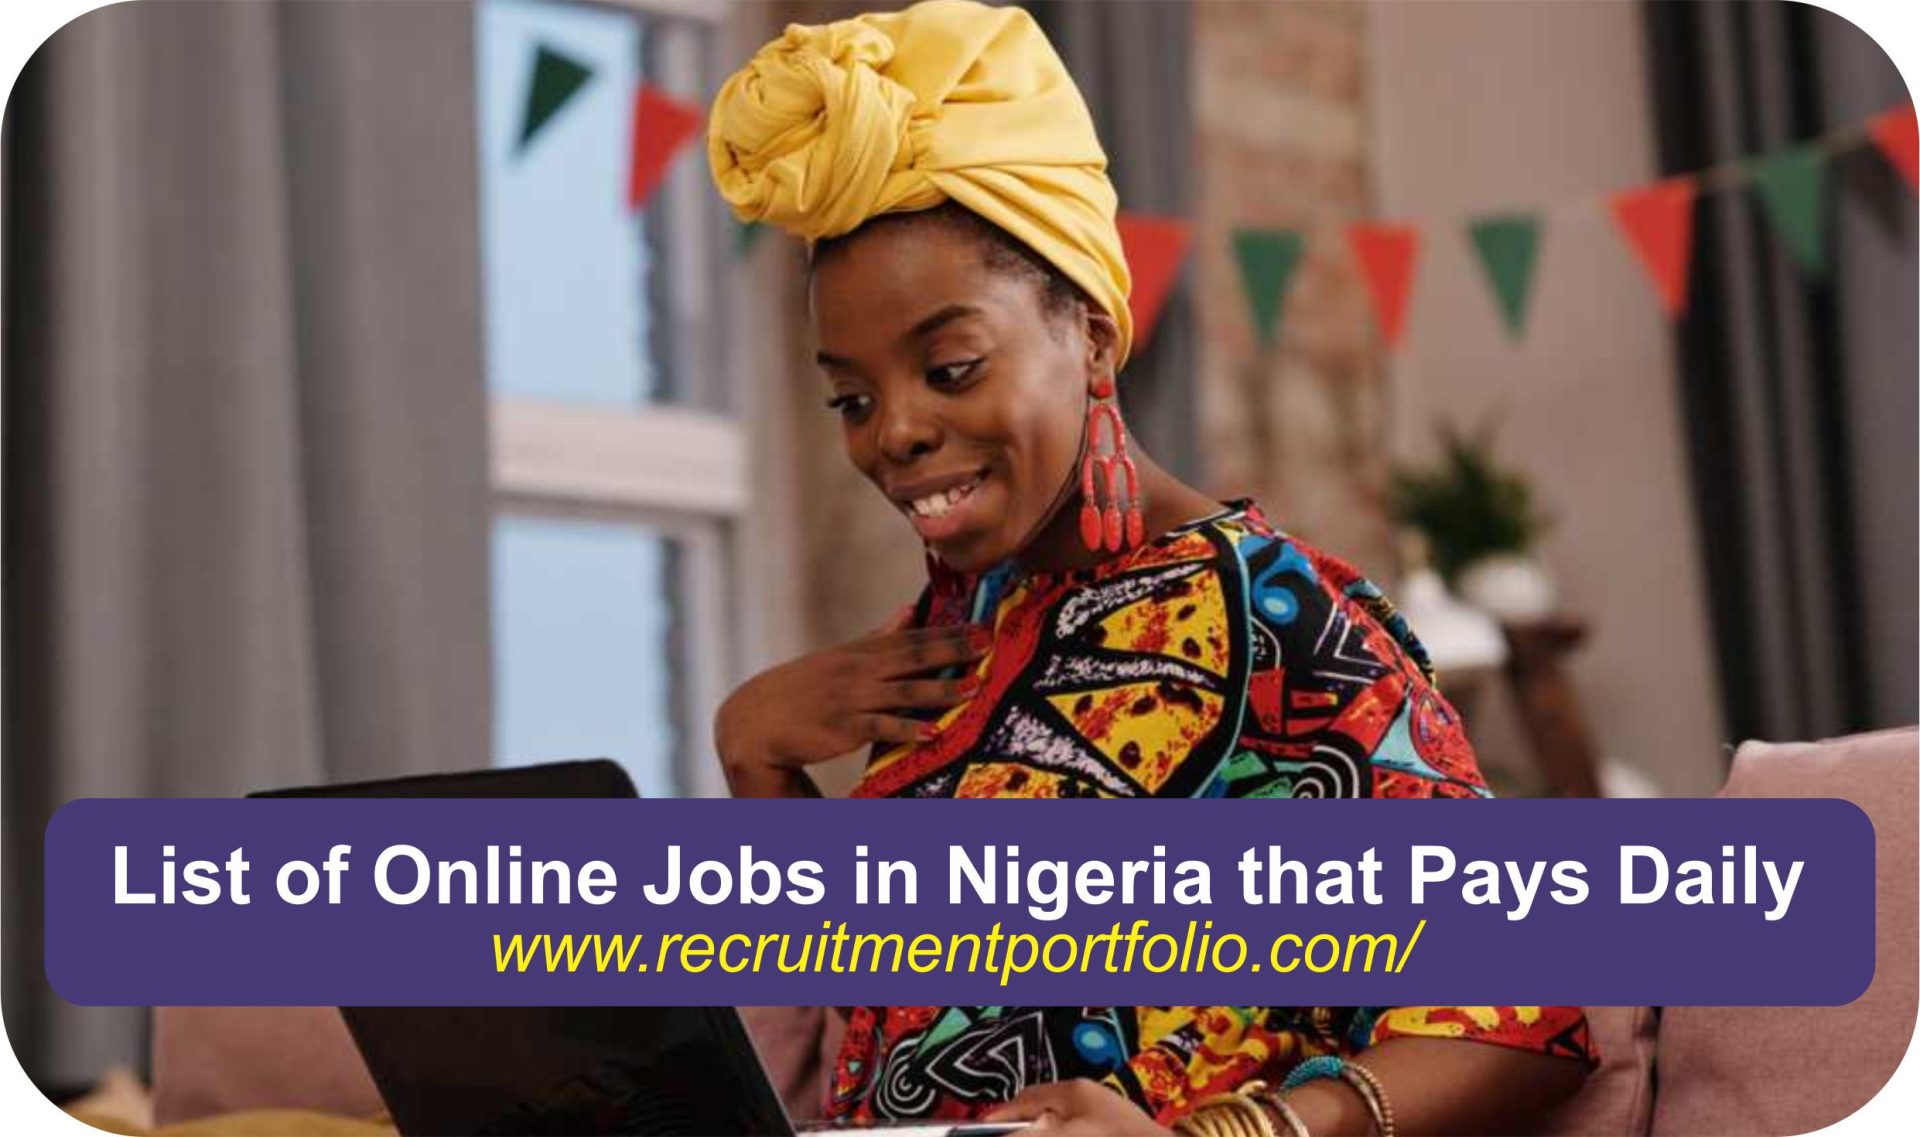 List of Online Jobs in Nigeria that Pays Daily